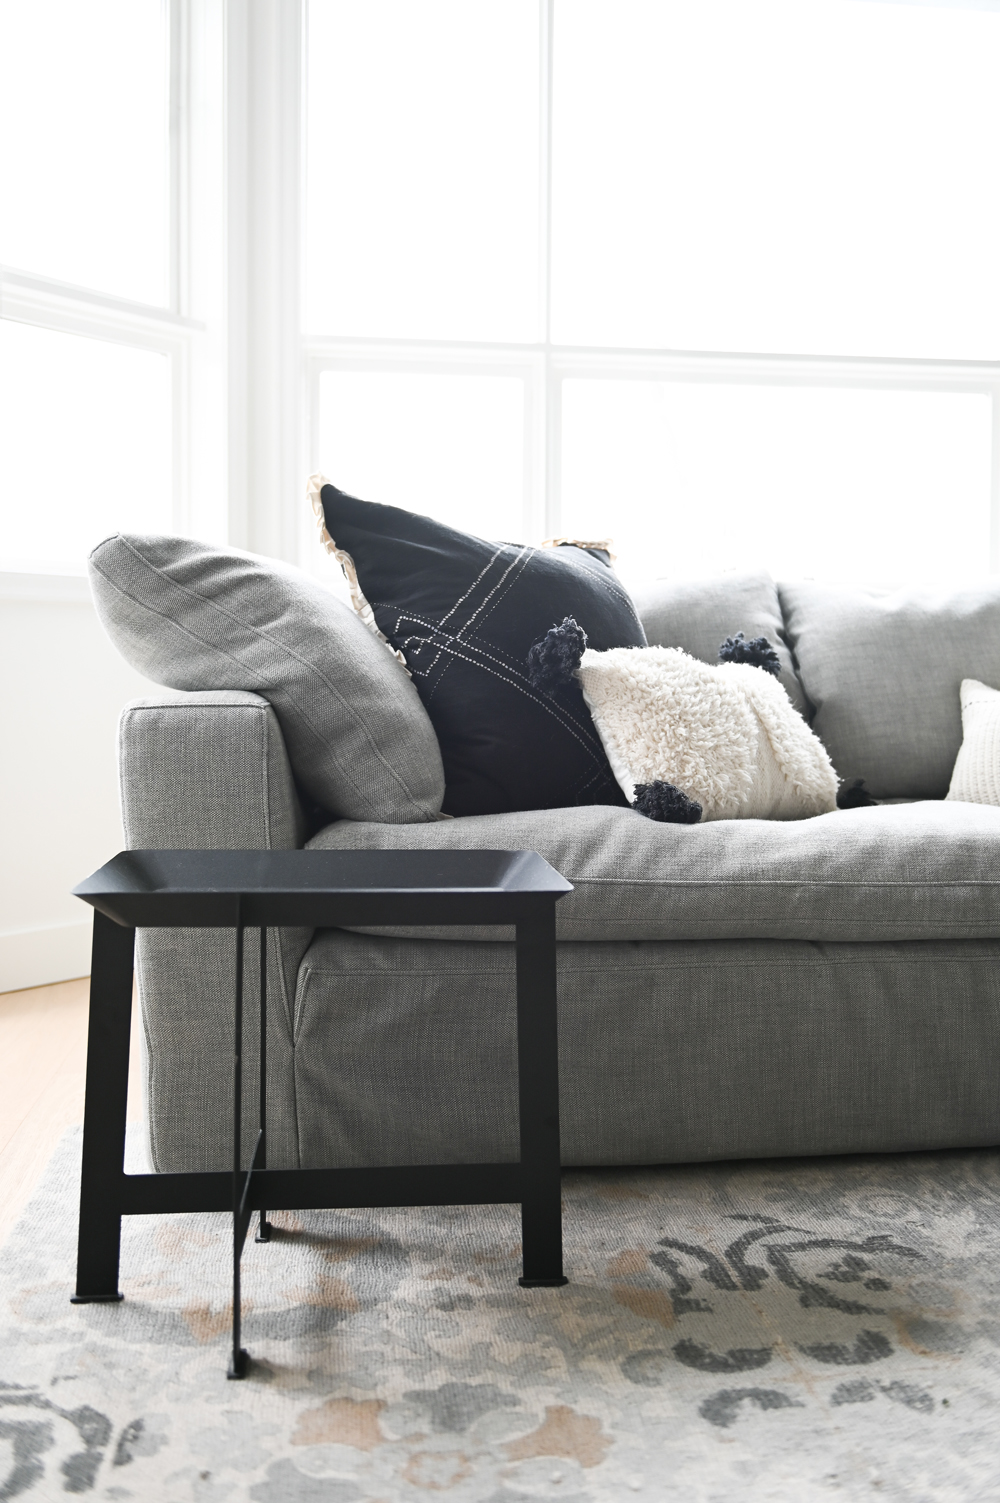 black side table in front of grey sofa with grey, black and white cushions